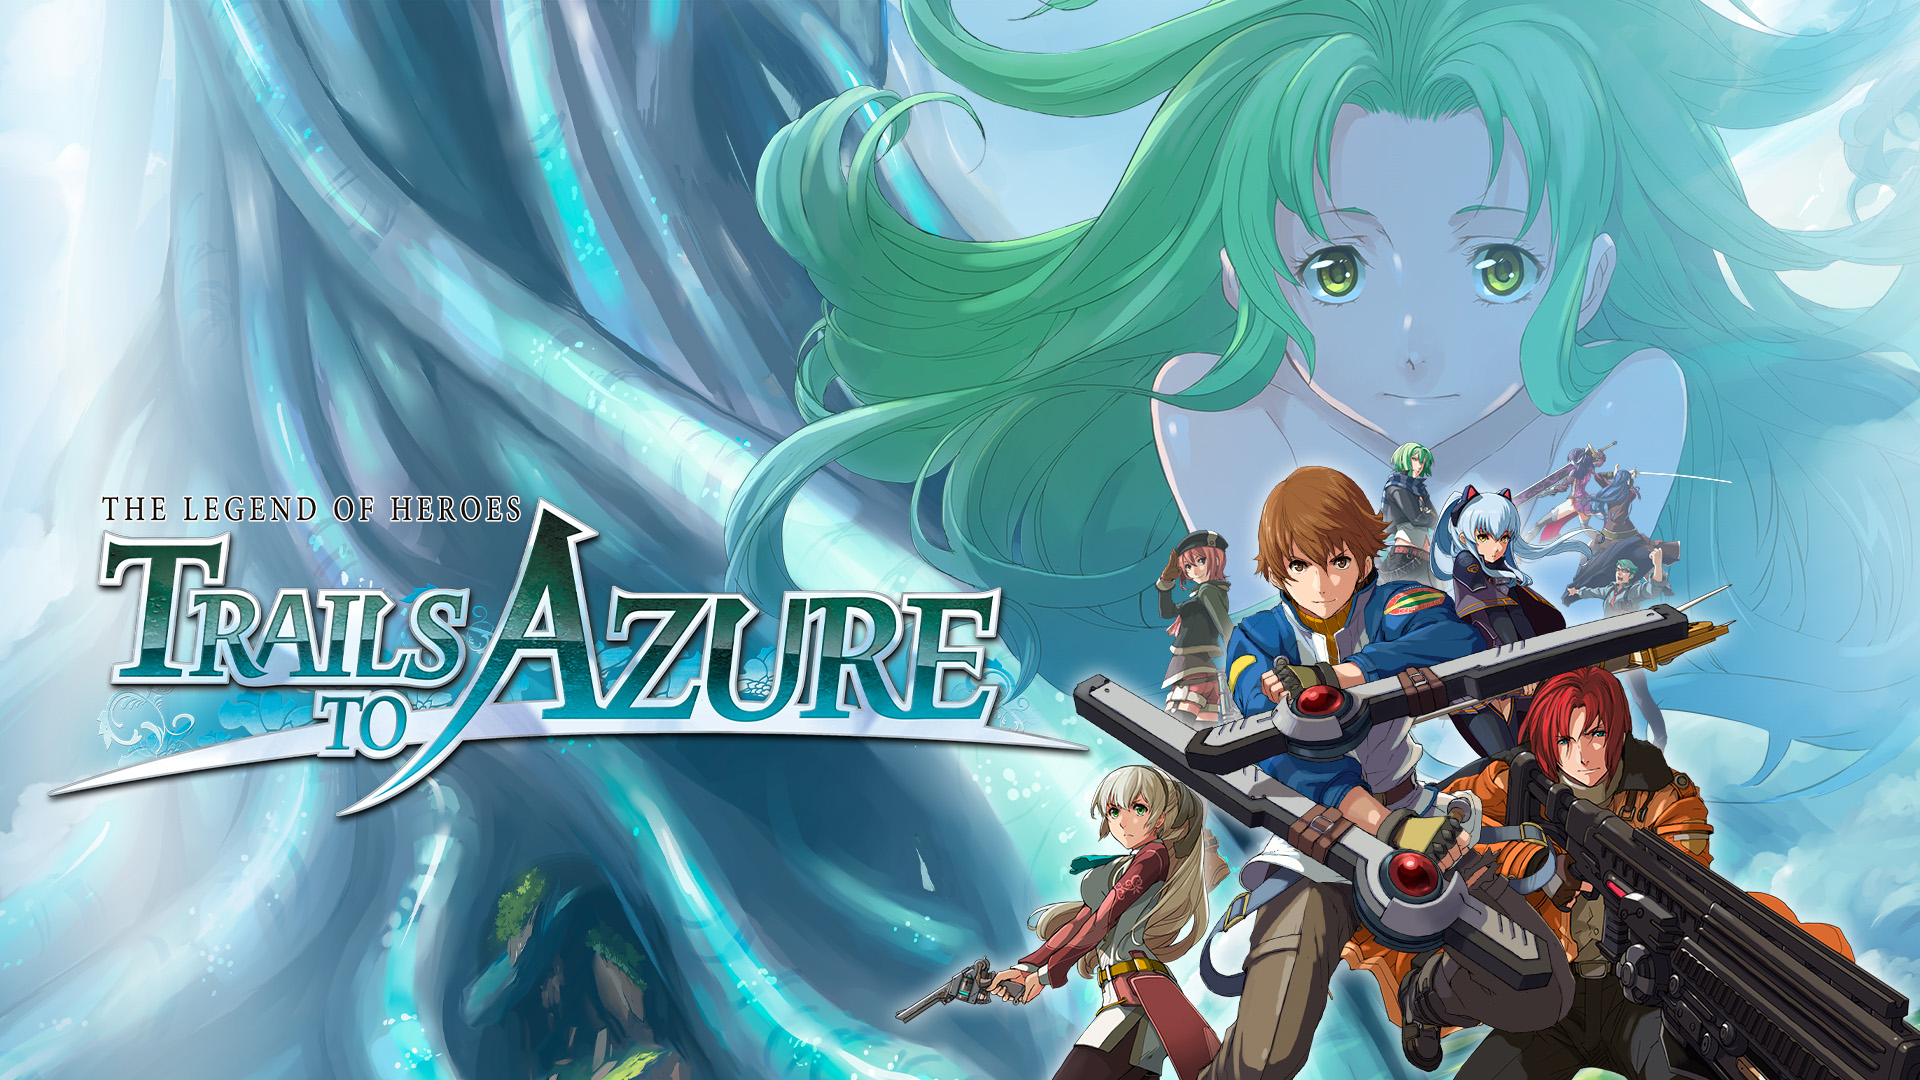 The key art for The Legend of Heroes: Trails to Azure featuring the main characters of the game